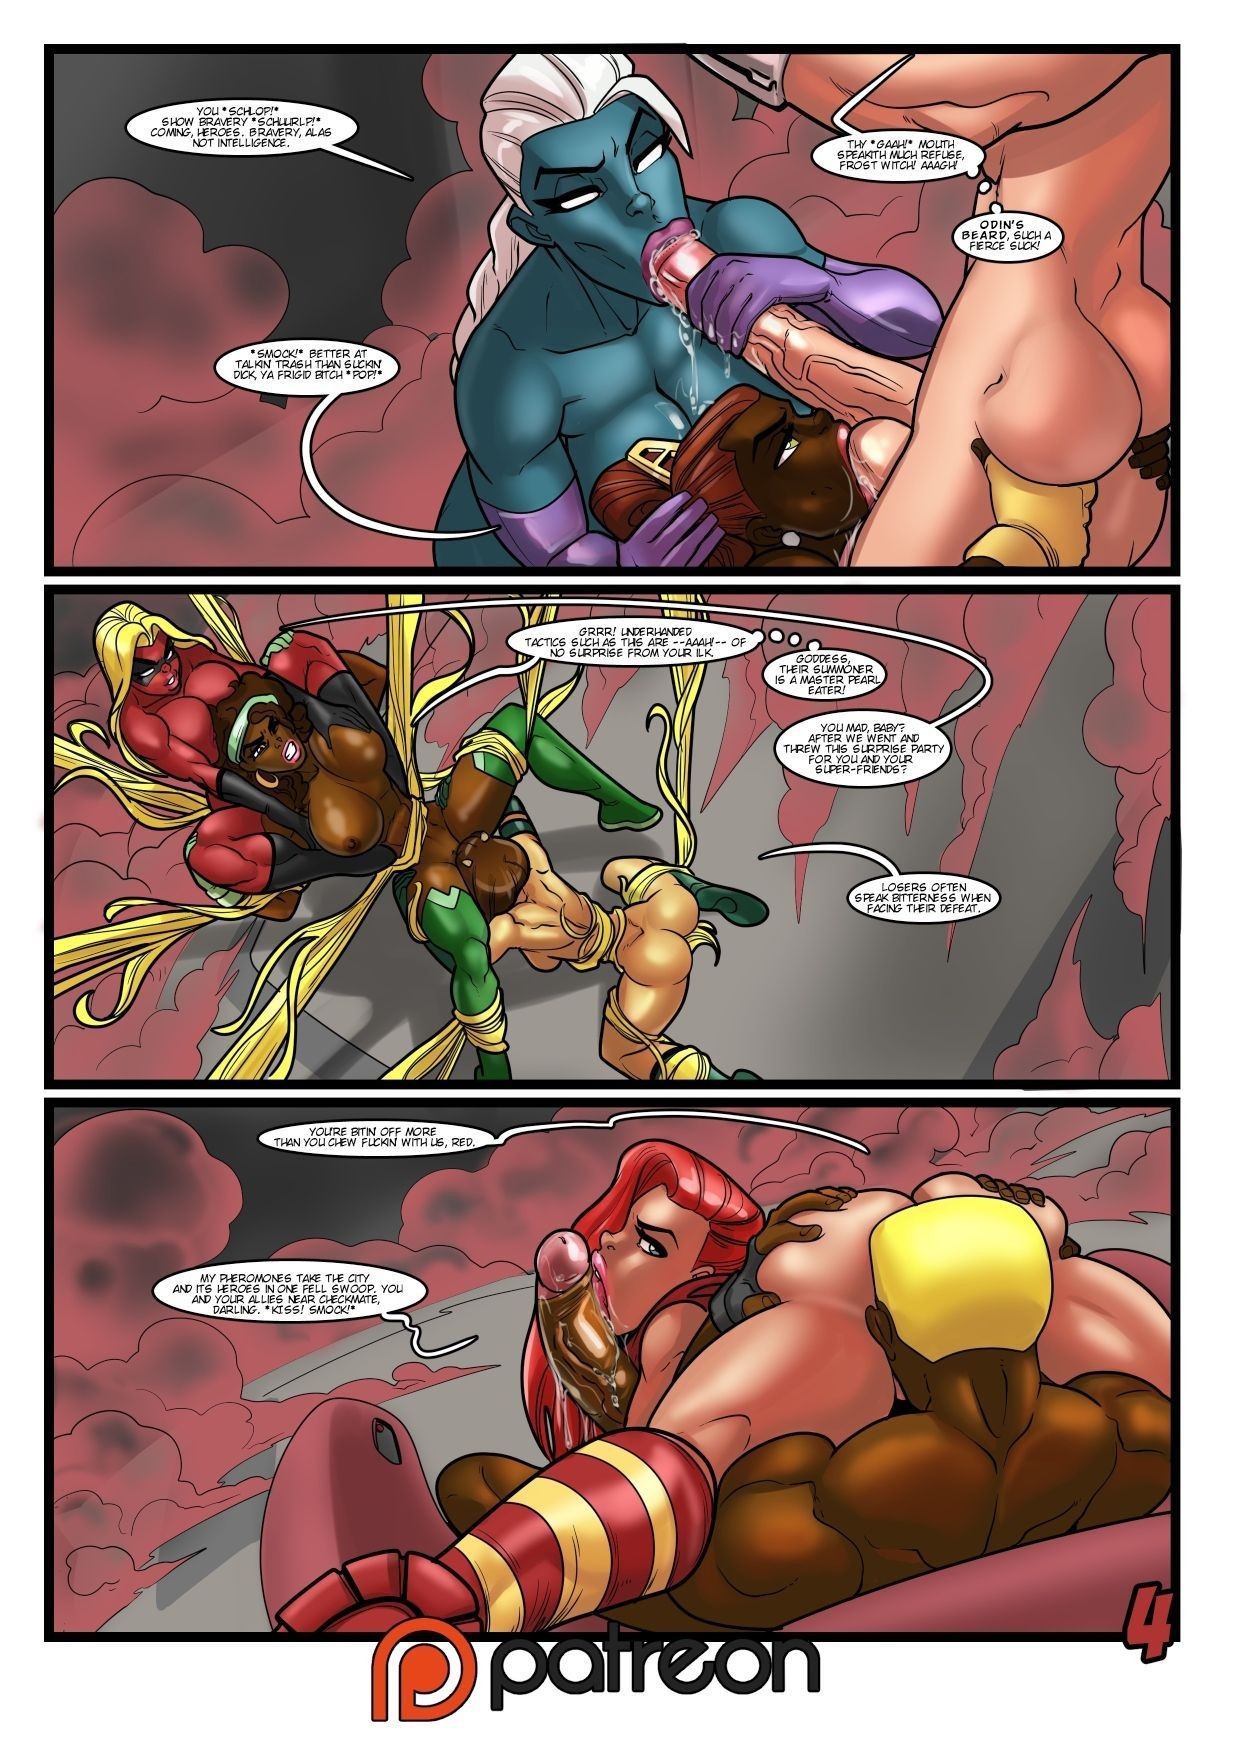 Hero Tales 5: Shades of Evil porn comic picture 5